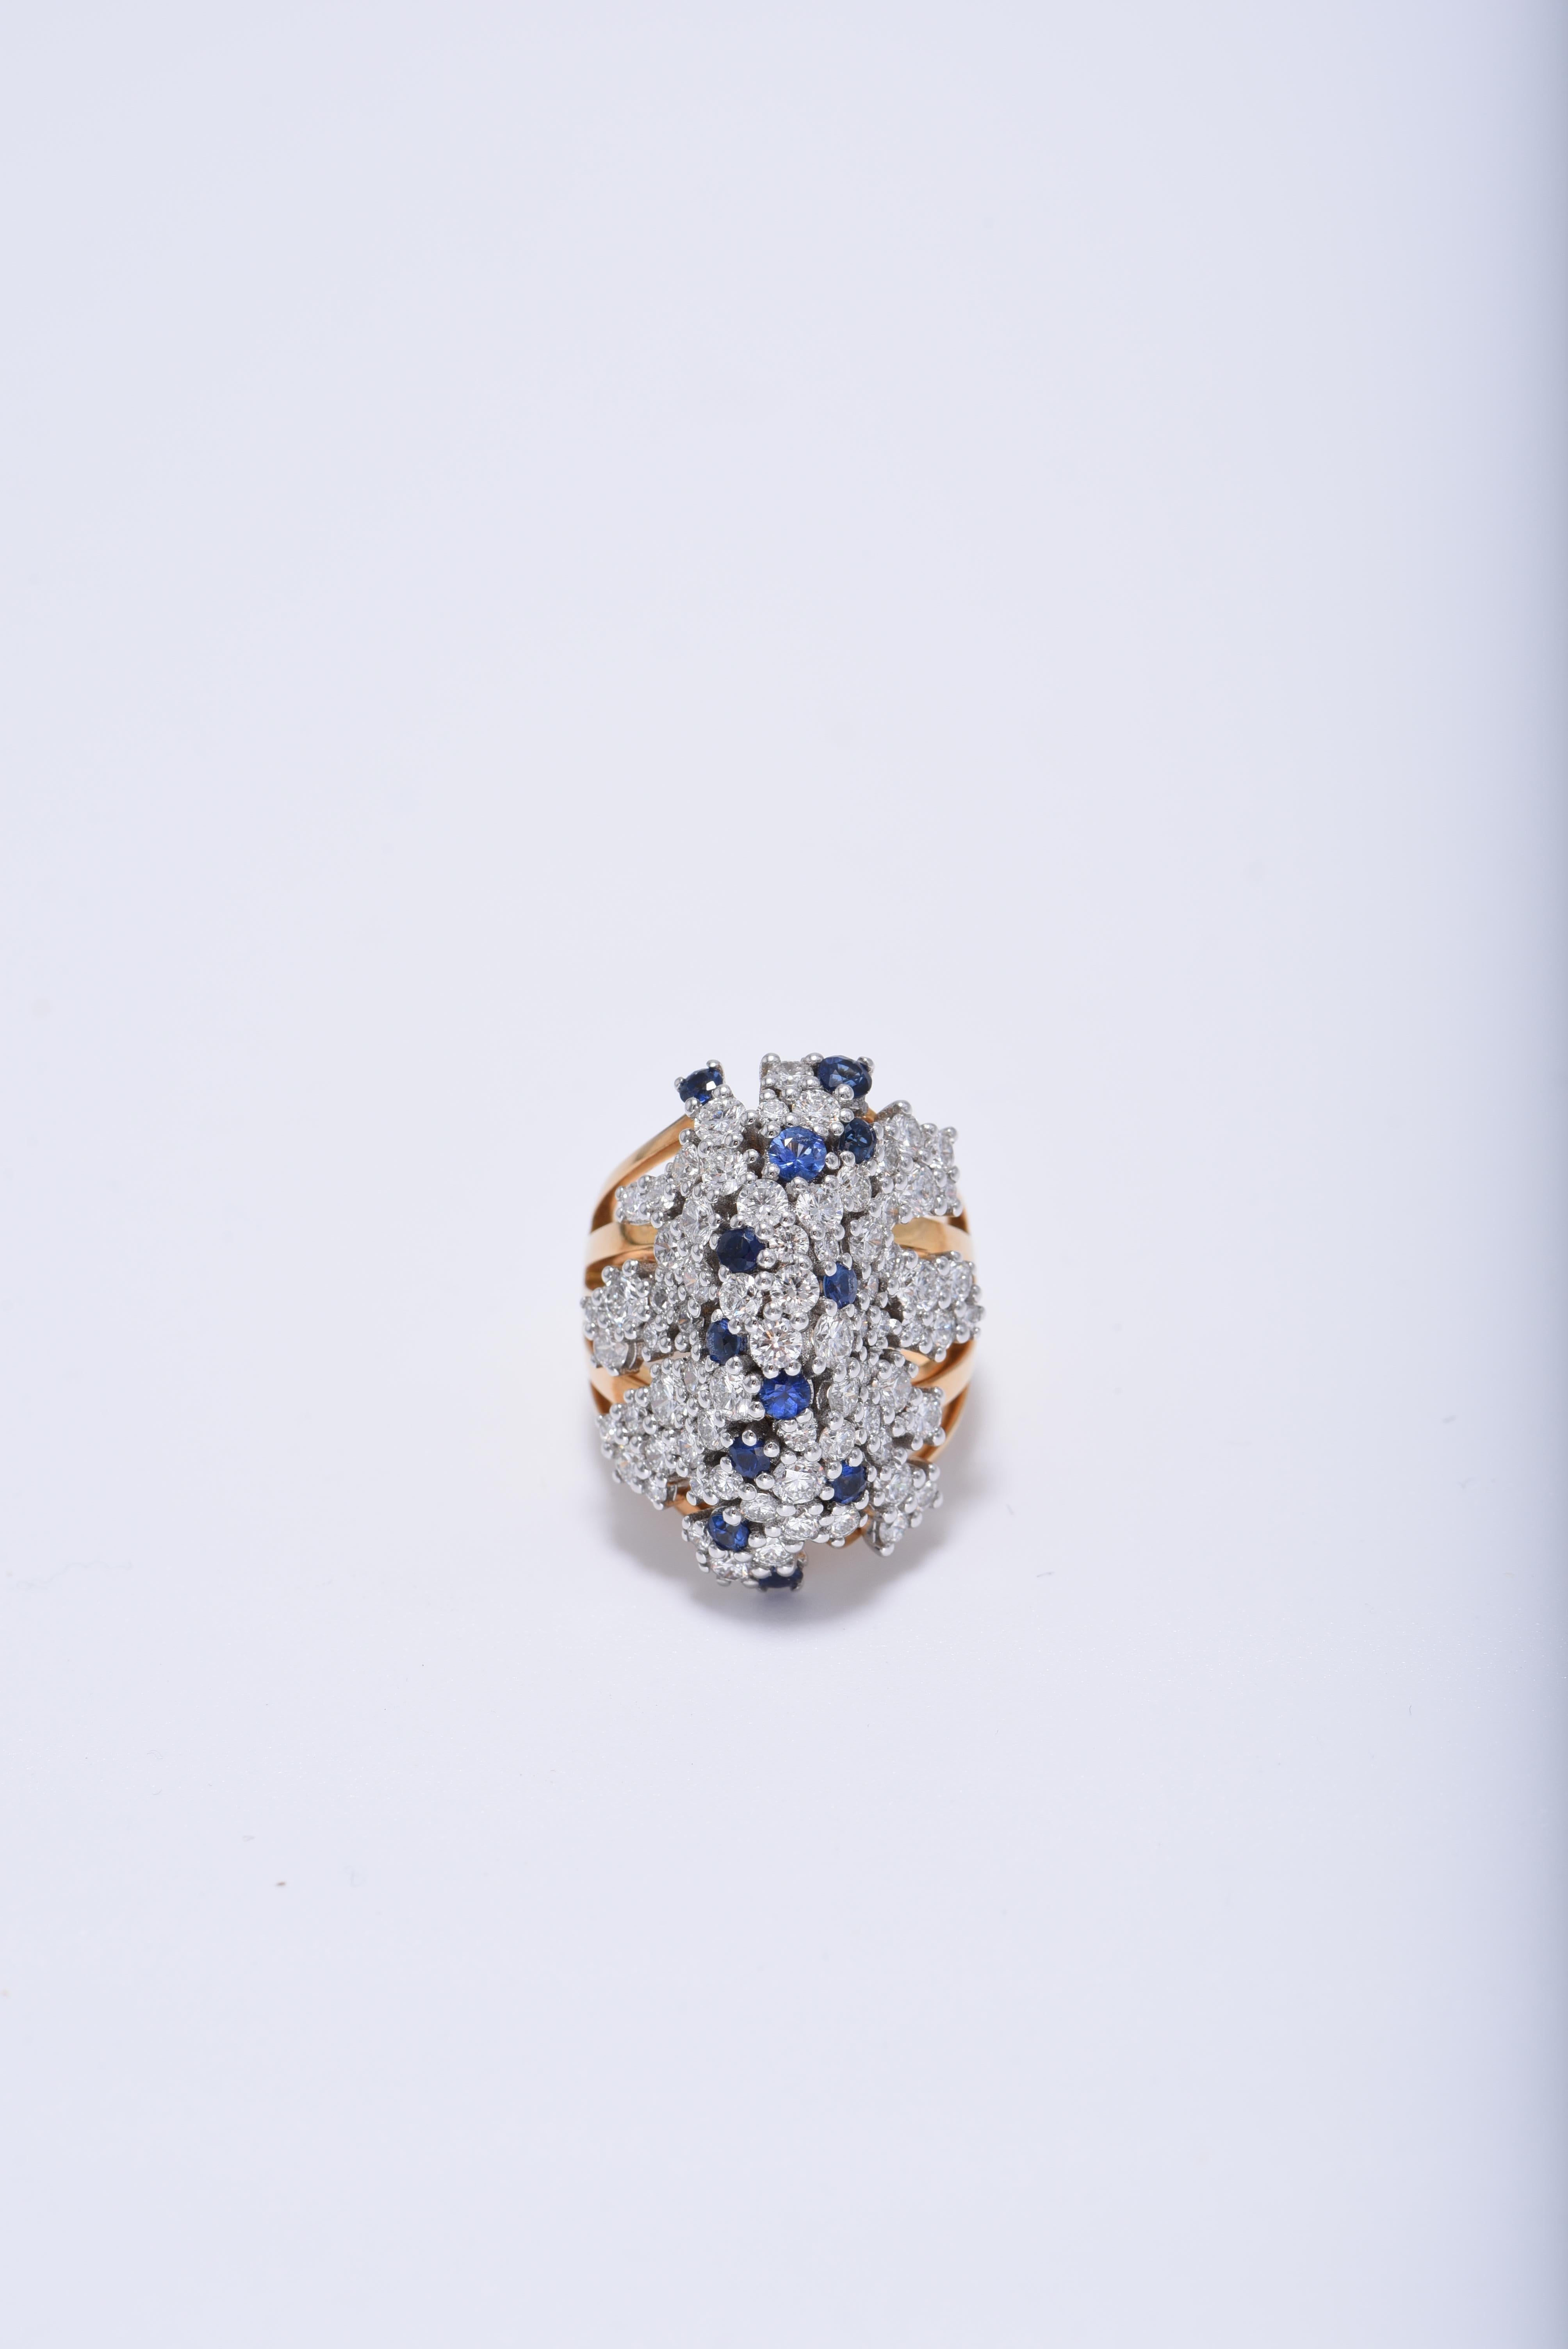 For Sale:  18K Gold, White Diamond, and Blue Sapphire Ring 2